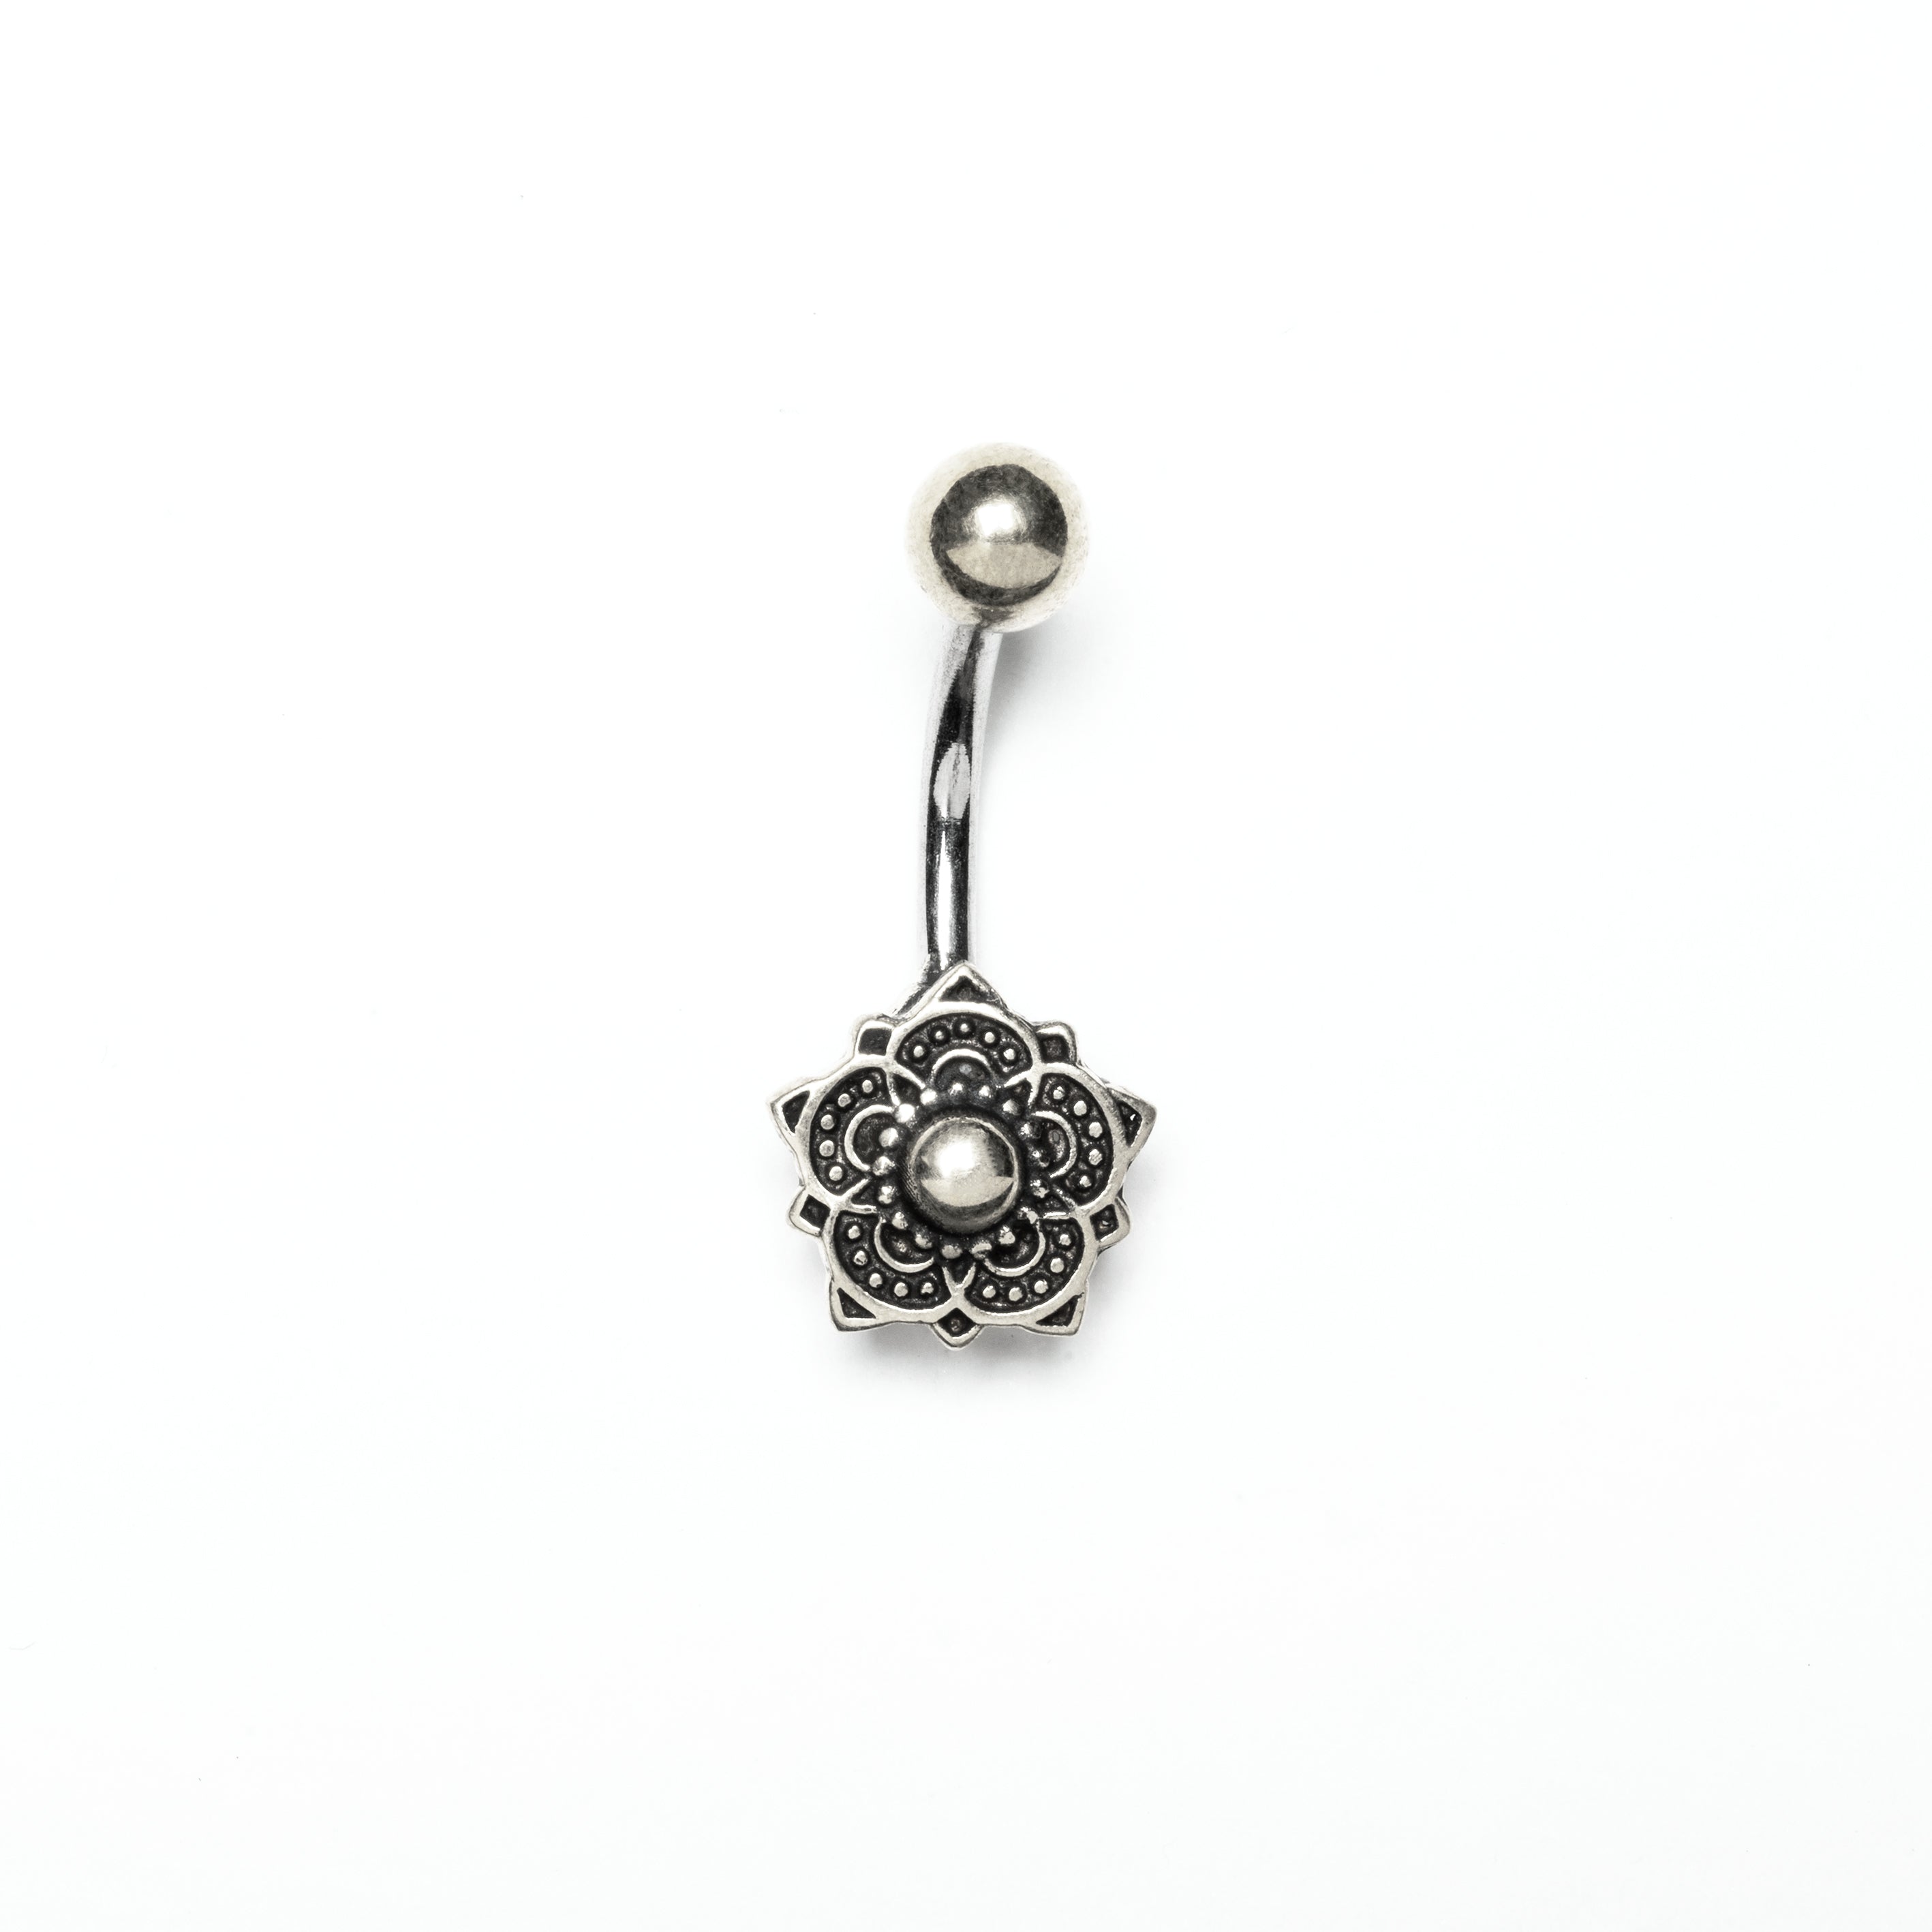 Silver Lalita Belly Piercing frontal view